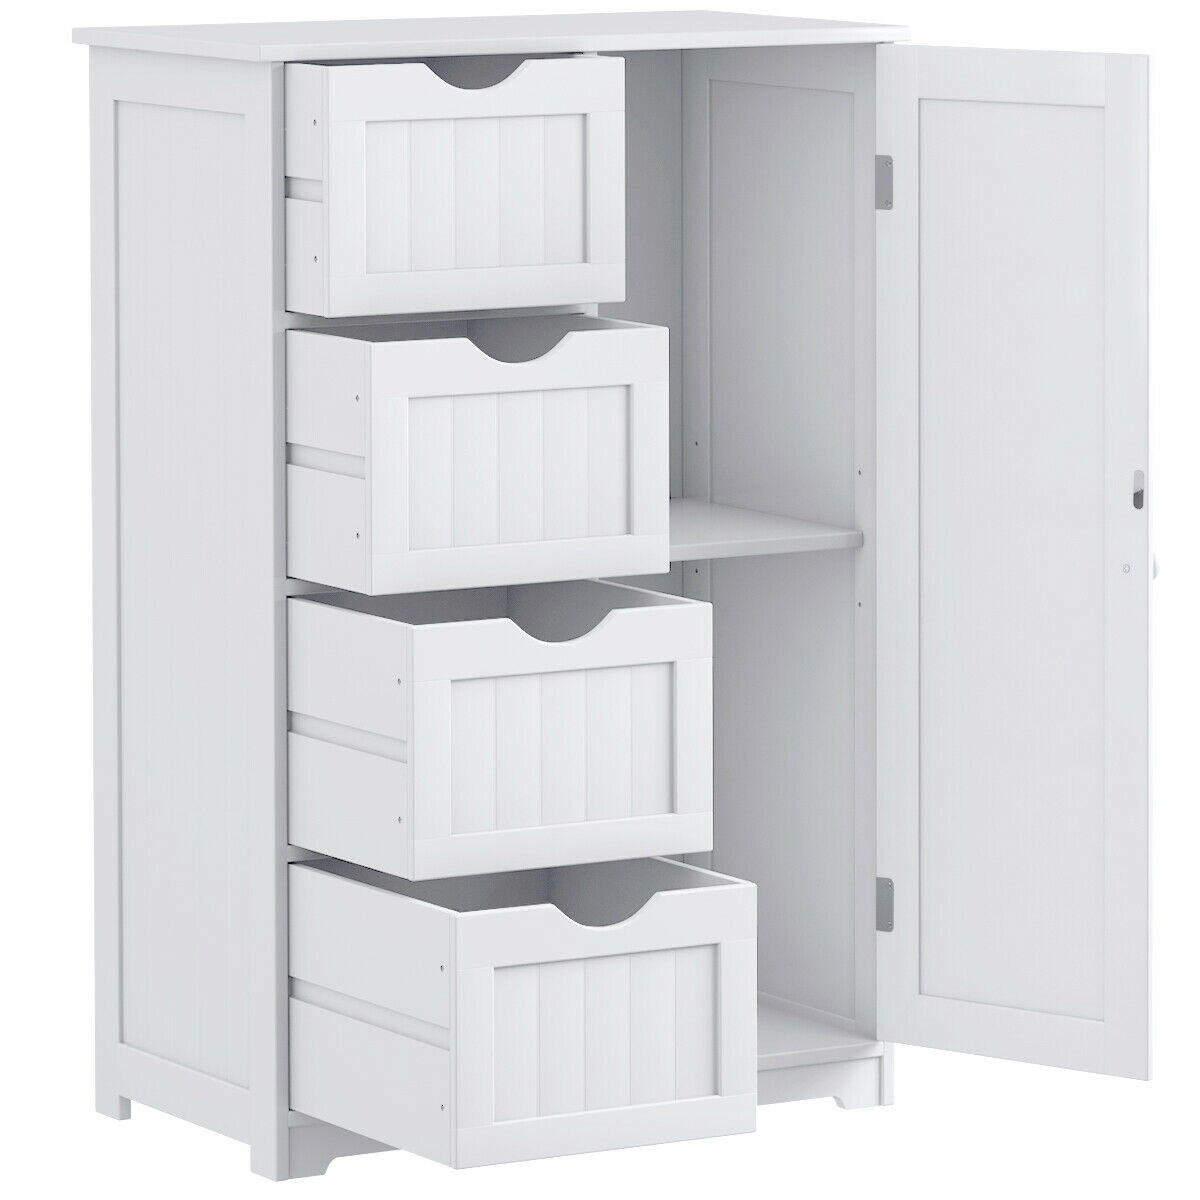 https://ak1.ostkcdn.com/images/products/is/images/direct/79b5ac7bc0c9a7320fe793843086d7b5c2953aa0/Costway-Wooden-4-Drawer-Bathroom-Cabinet-Storage-Cupboard-2-Shelves.jpg